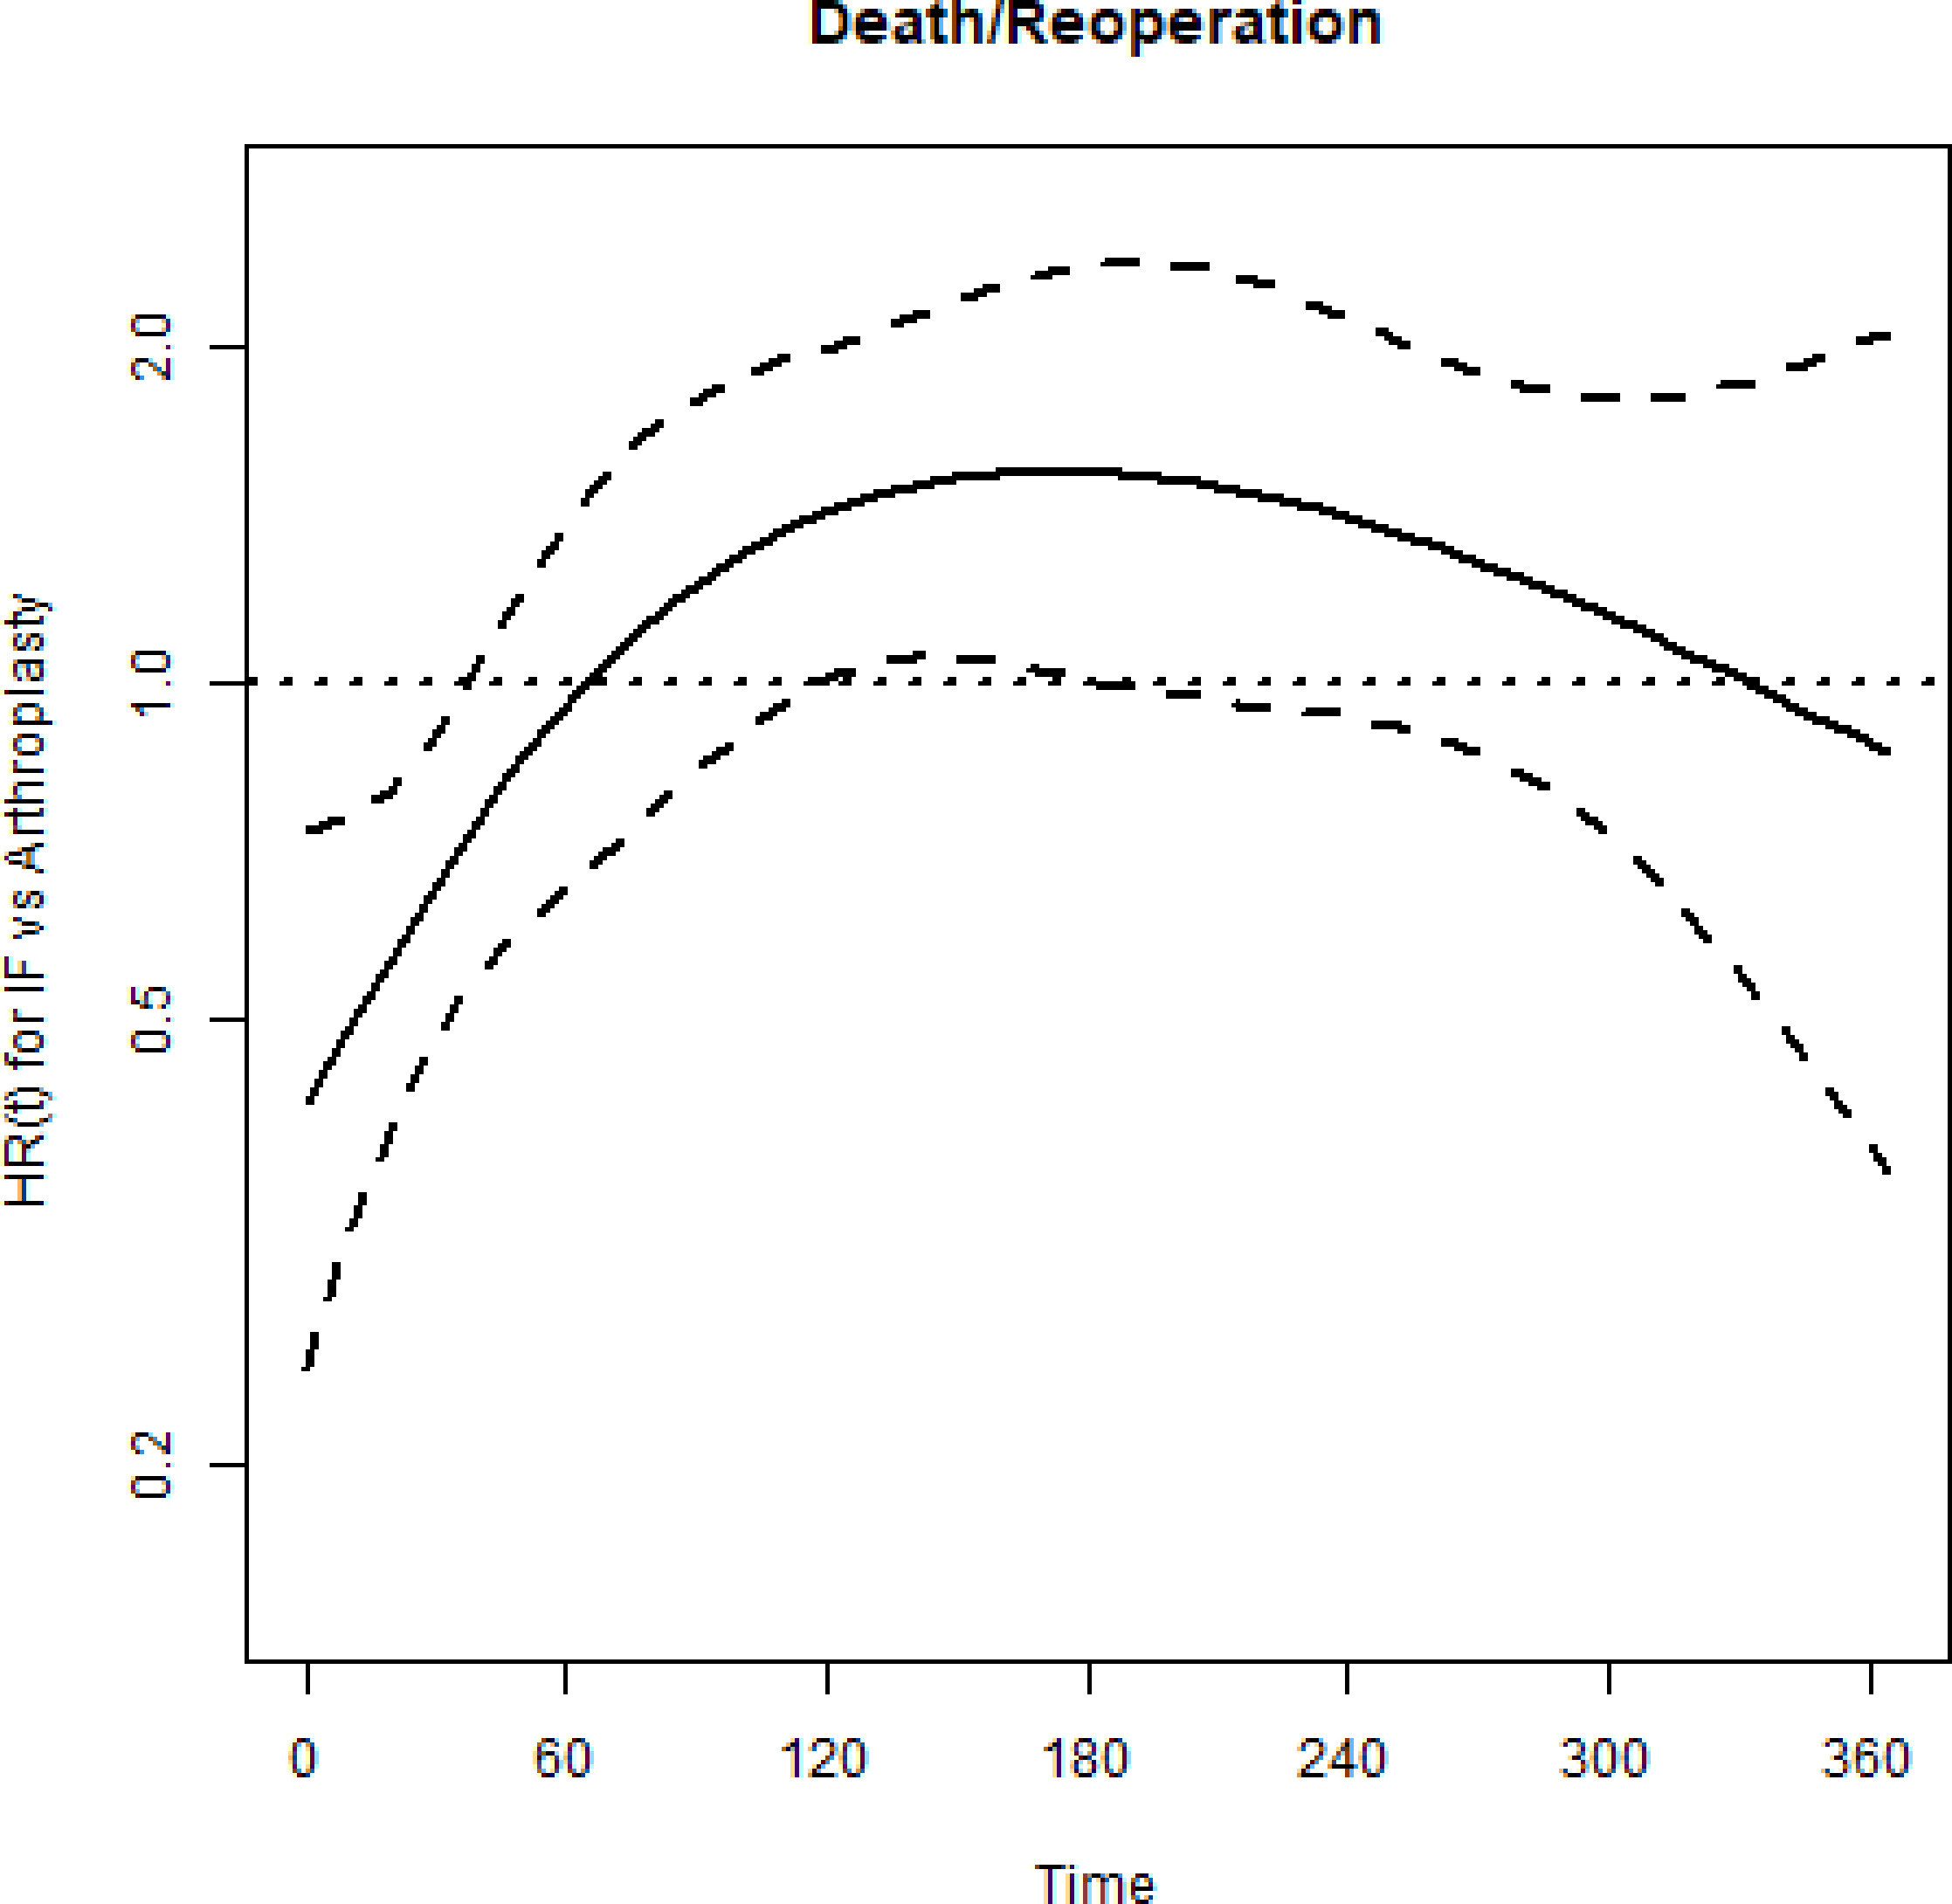 Fig. 3 
            Estimate of the ratio of hazard function for death/reoperation over time (days) for the internal fixation versus arthroplasty.
          